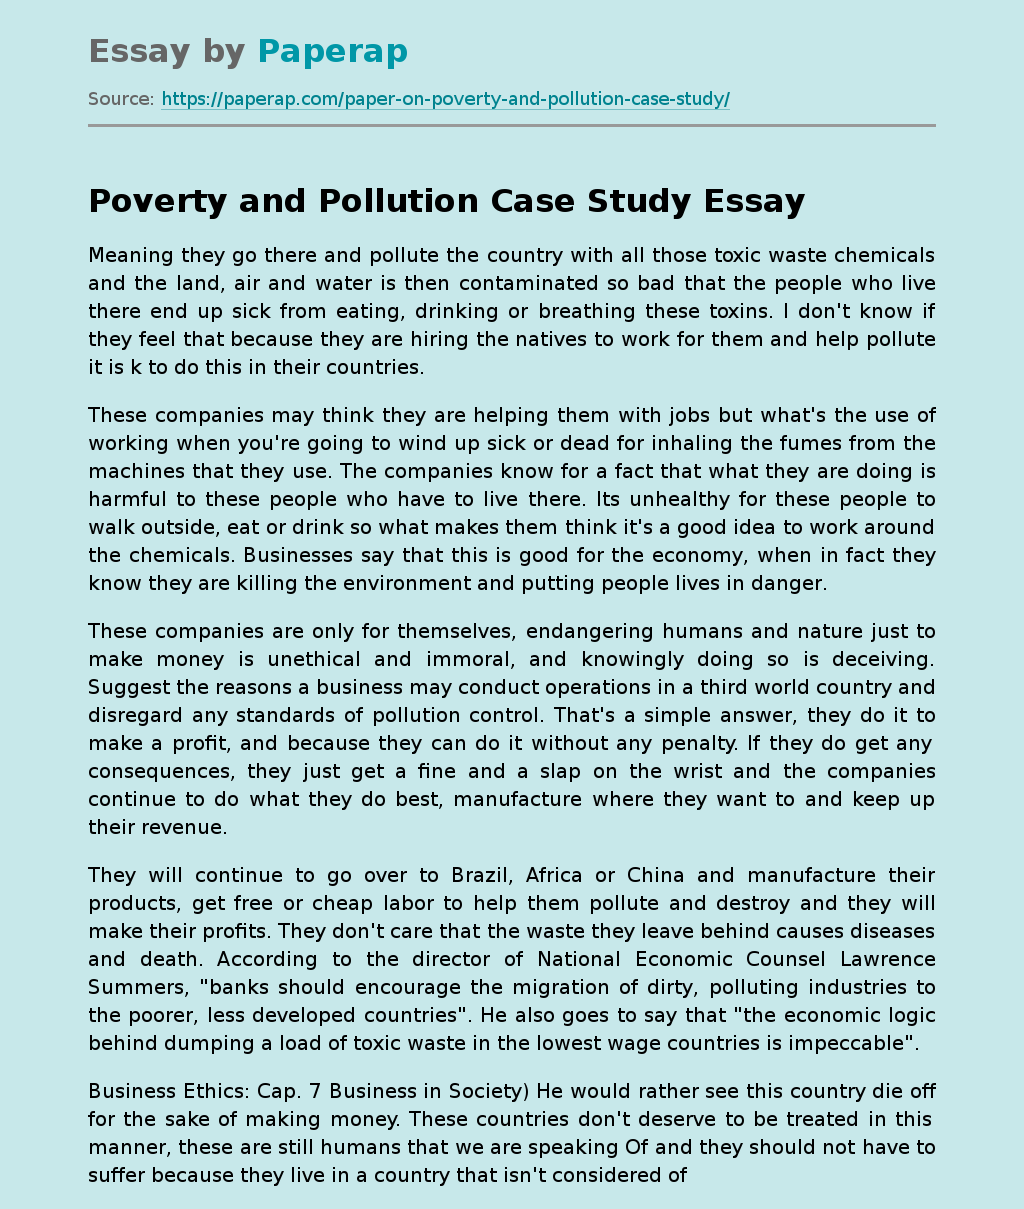 Poverty and Pollution Case Study